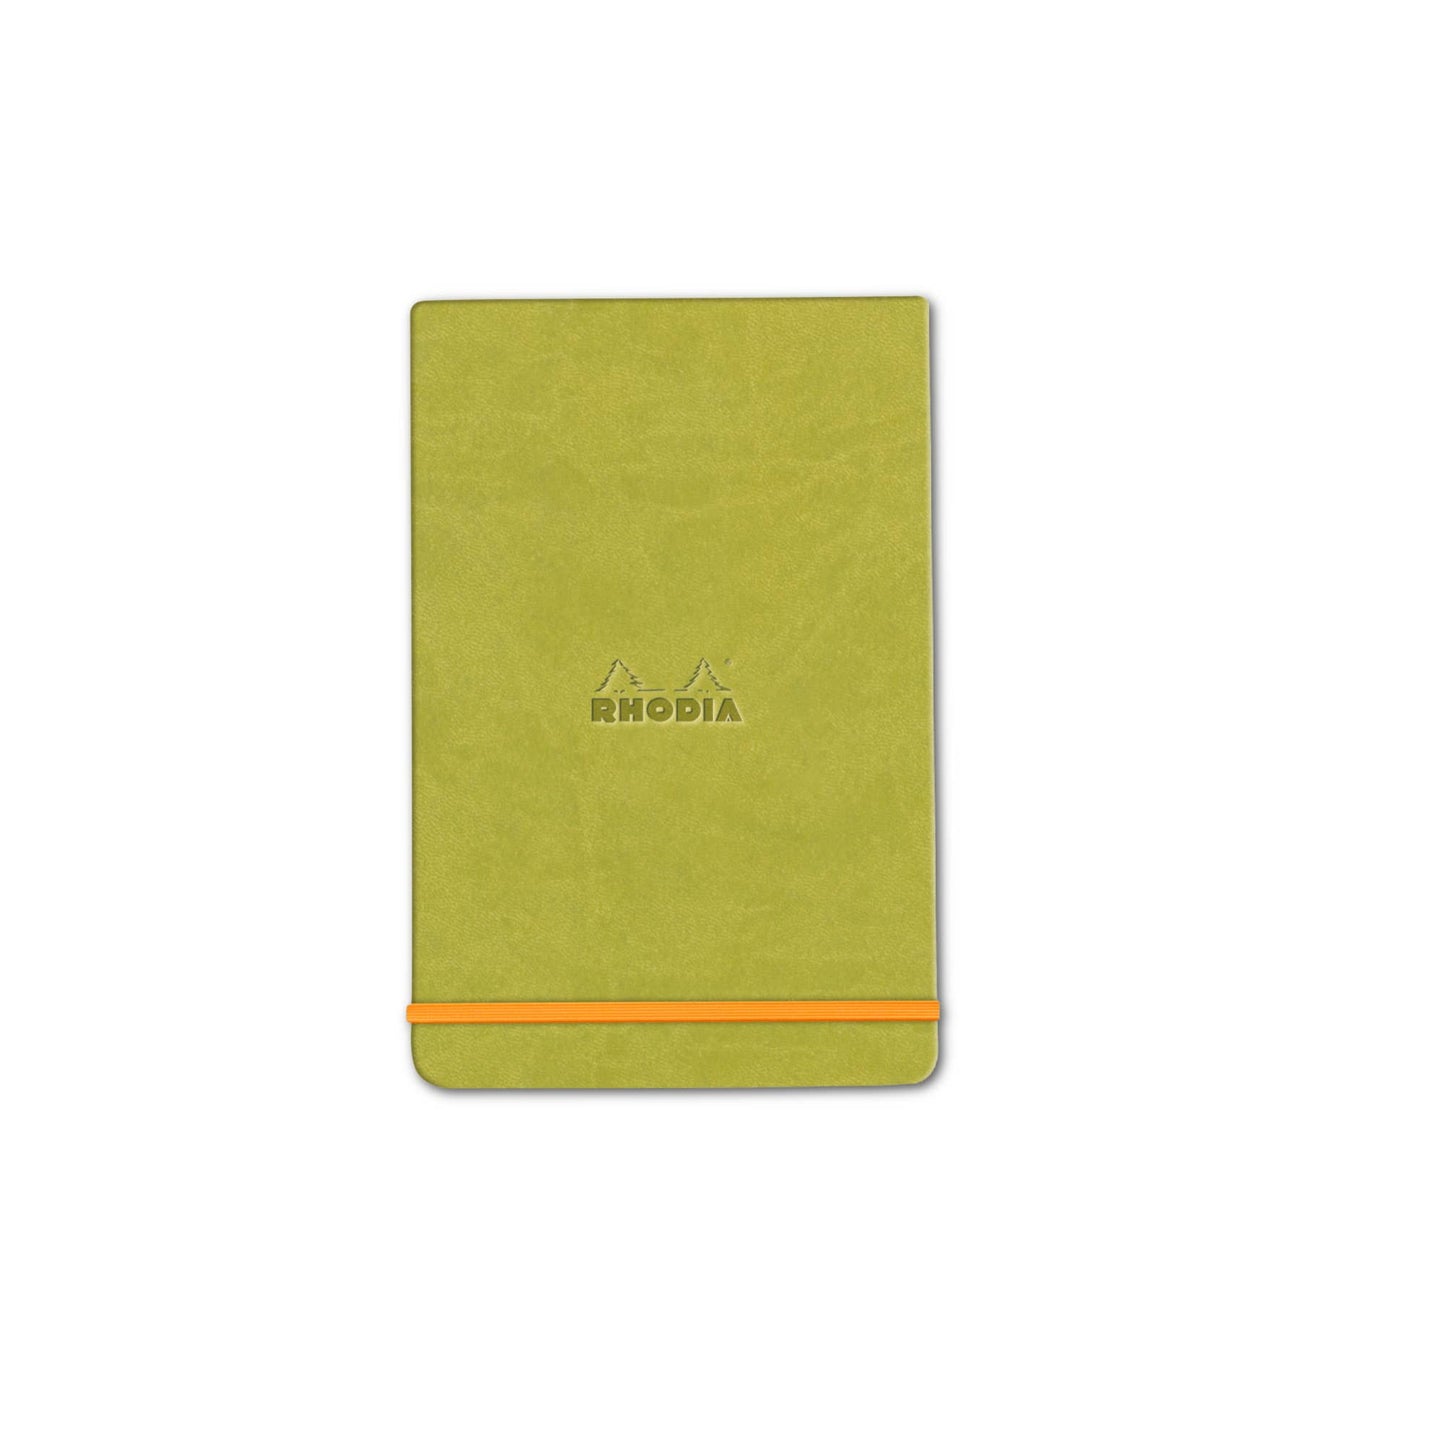 Rhodia Webnotepad - Reporter Style: A5 / Turquoise